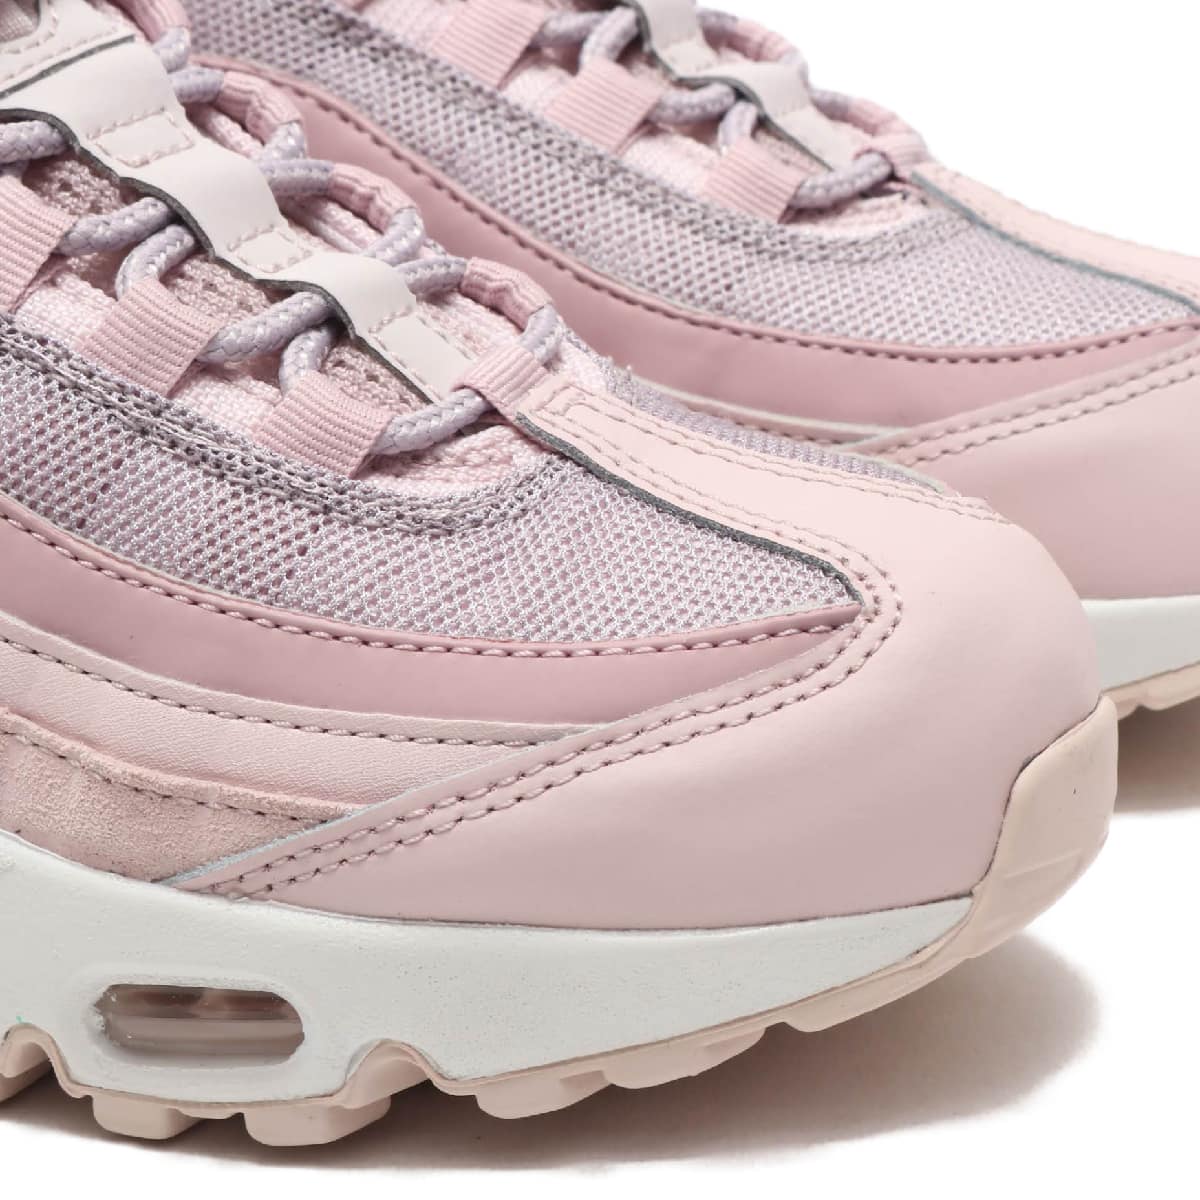 NIKE WMNS AIR MAX 95 BARELY ROSE/PLUM CHALK-SILVER LILAC 20SP-I